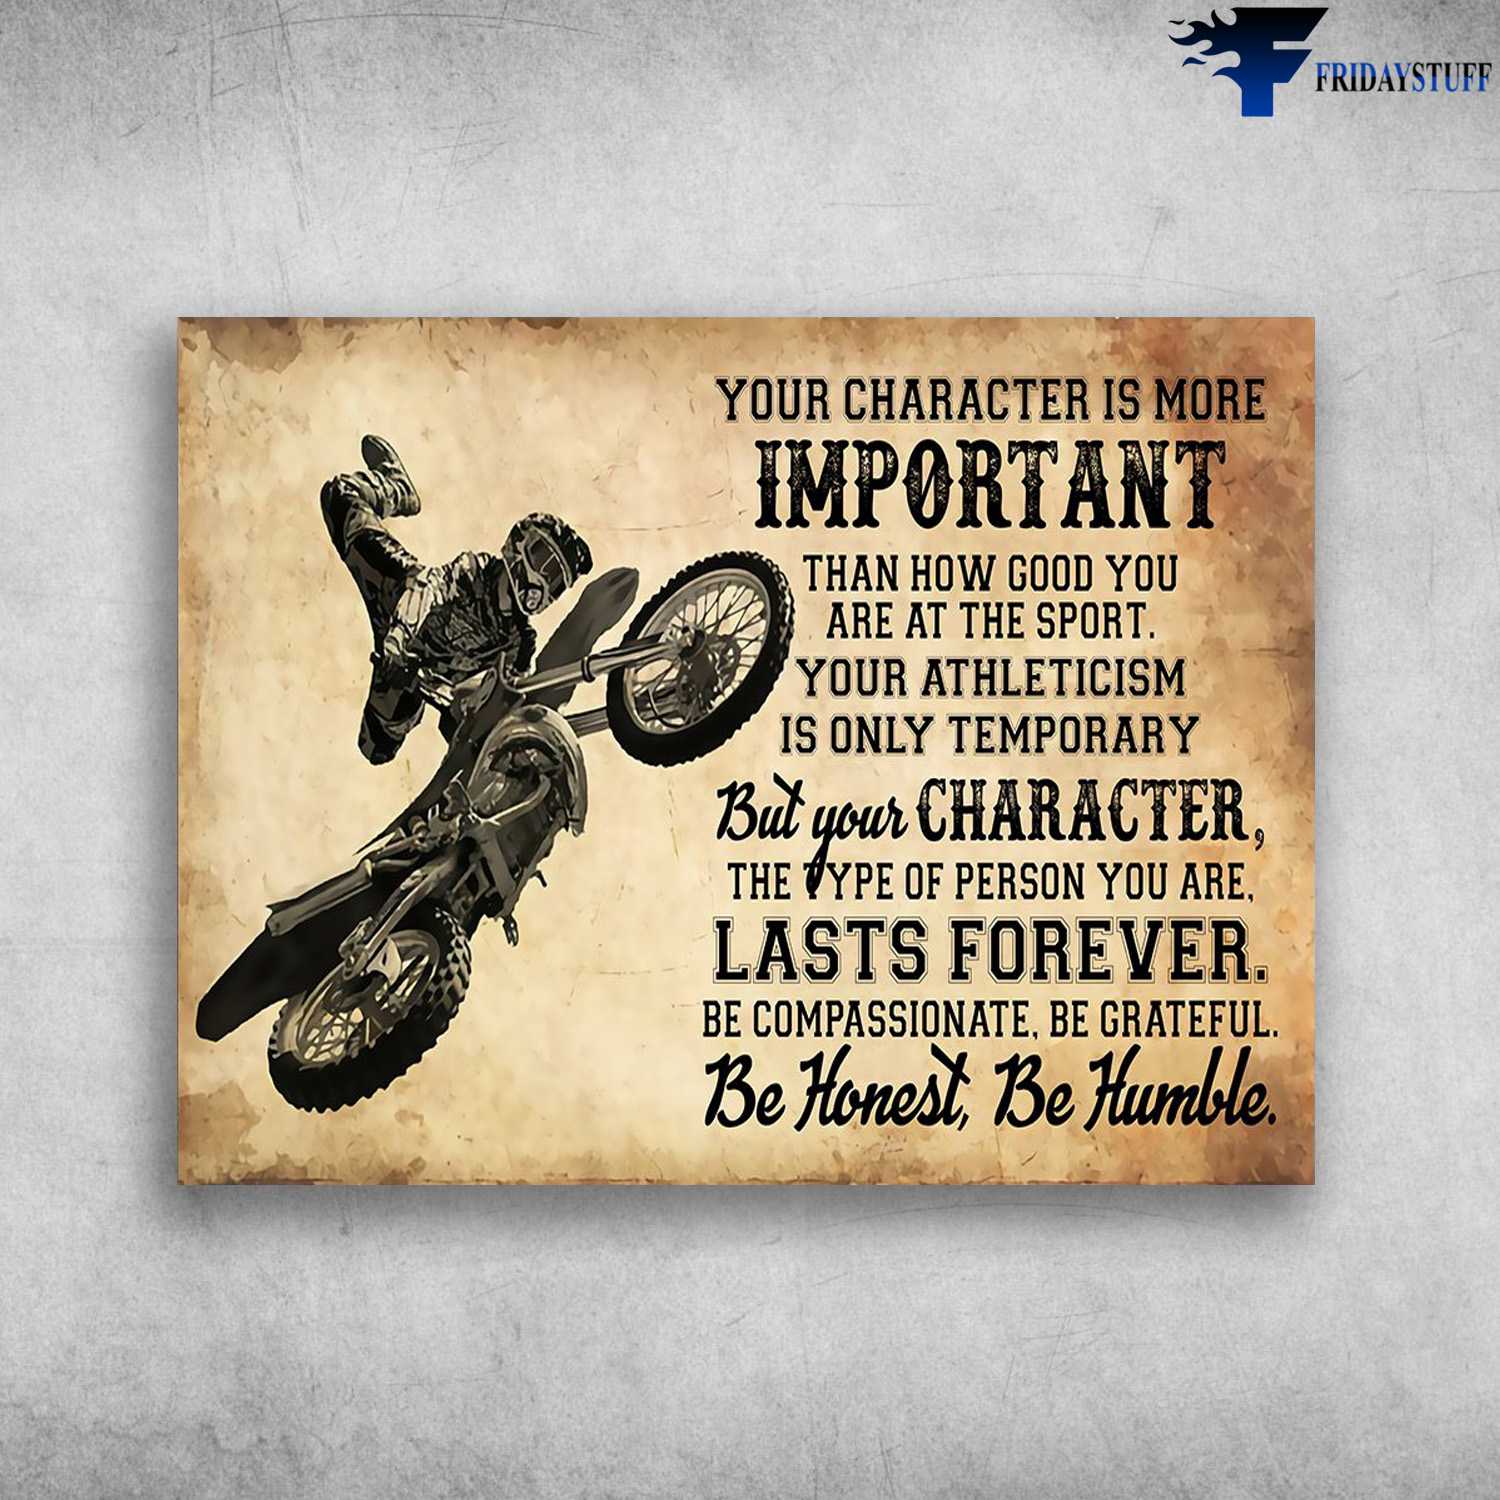 Dirtbike Lover, Motocross Poster - Your Character Is More Important, Than Good You Are, At The Sport, Your Athleticism Is Only Temporary